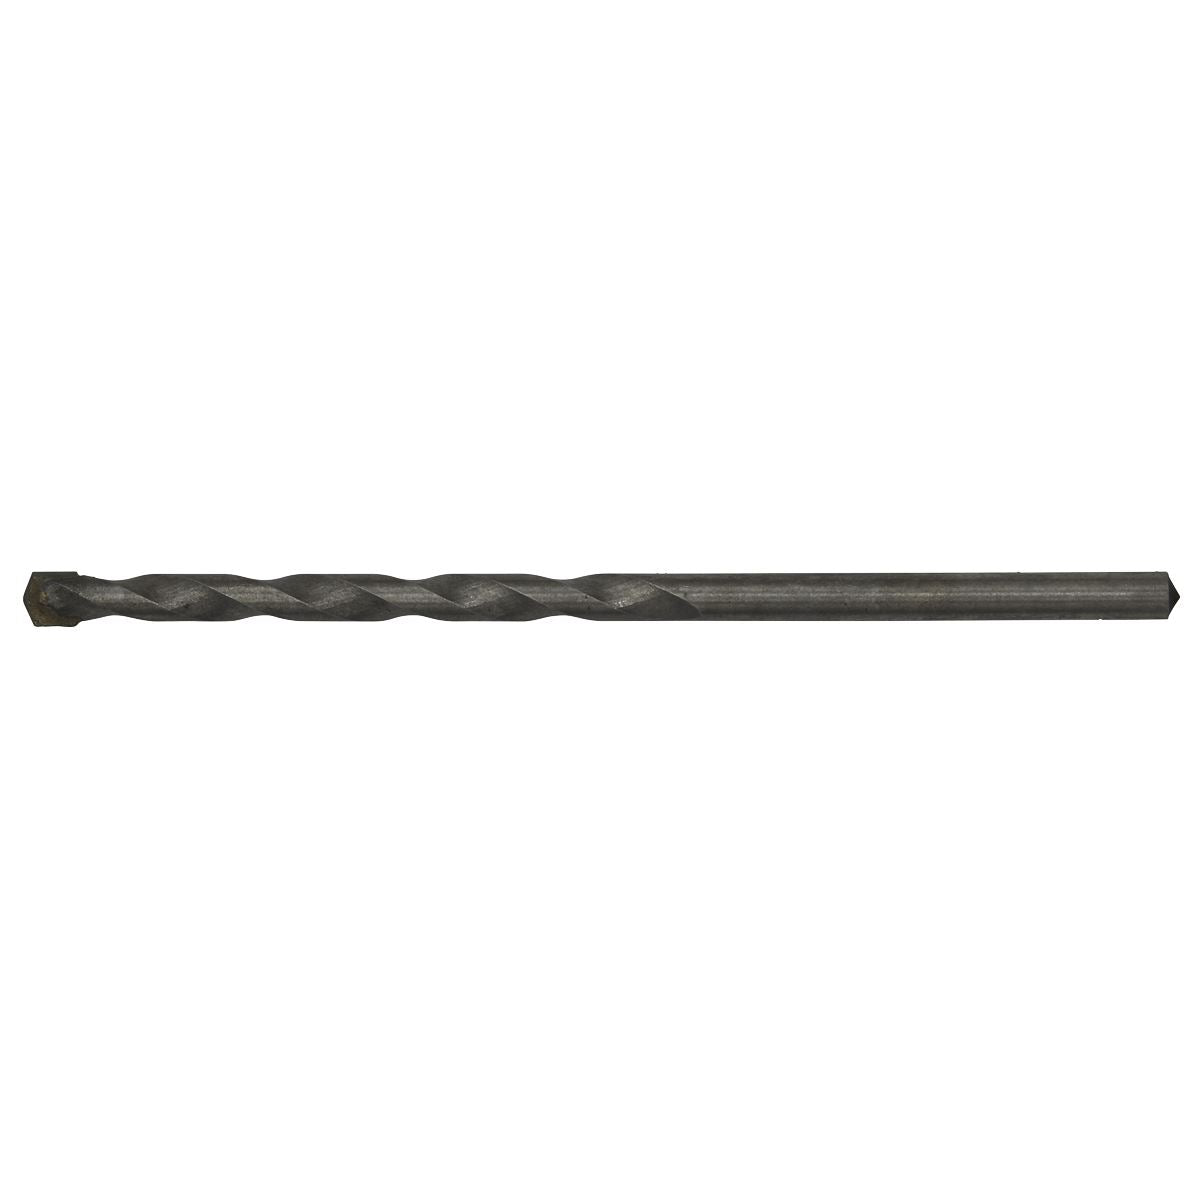 Worksafe by Sealey Straight Shank Rotary Impact Drill Bit Ø4.5 x 85mm